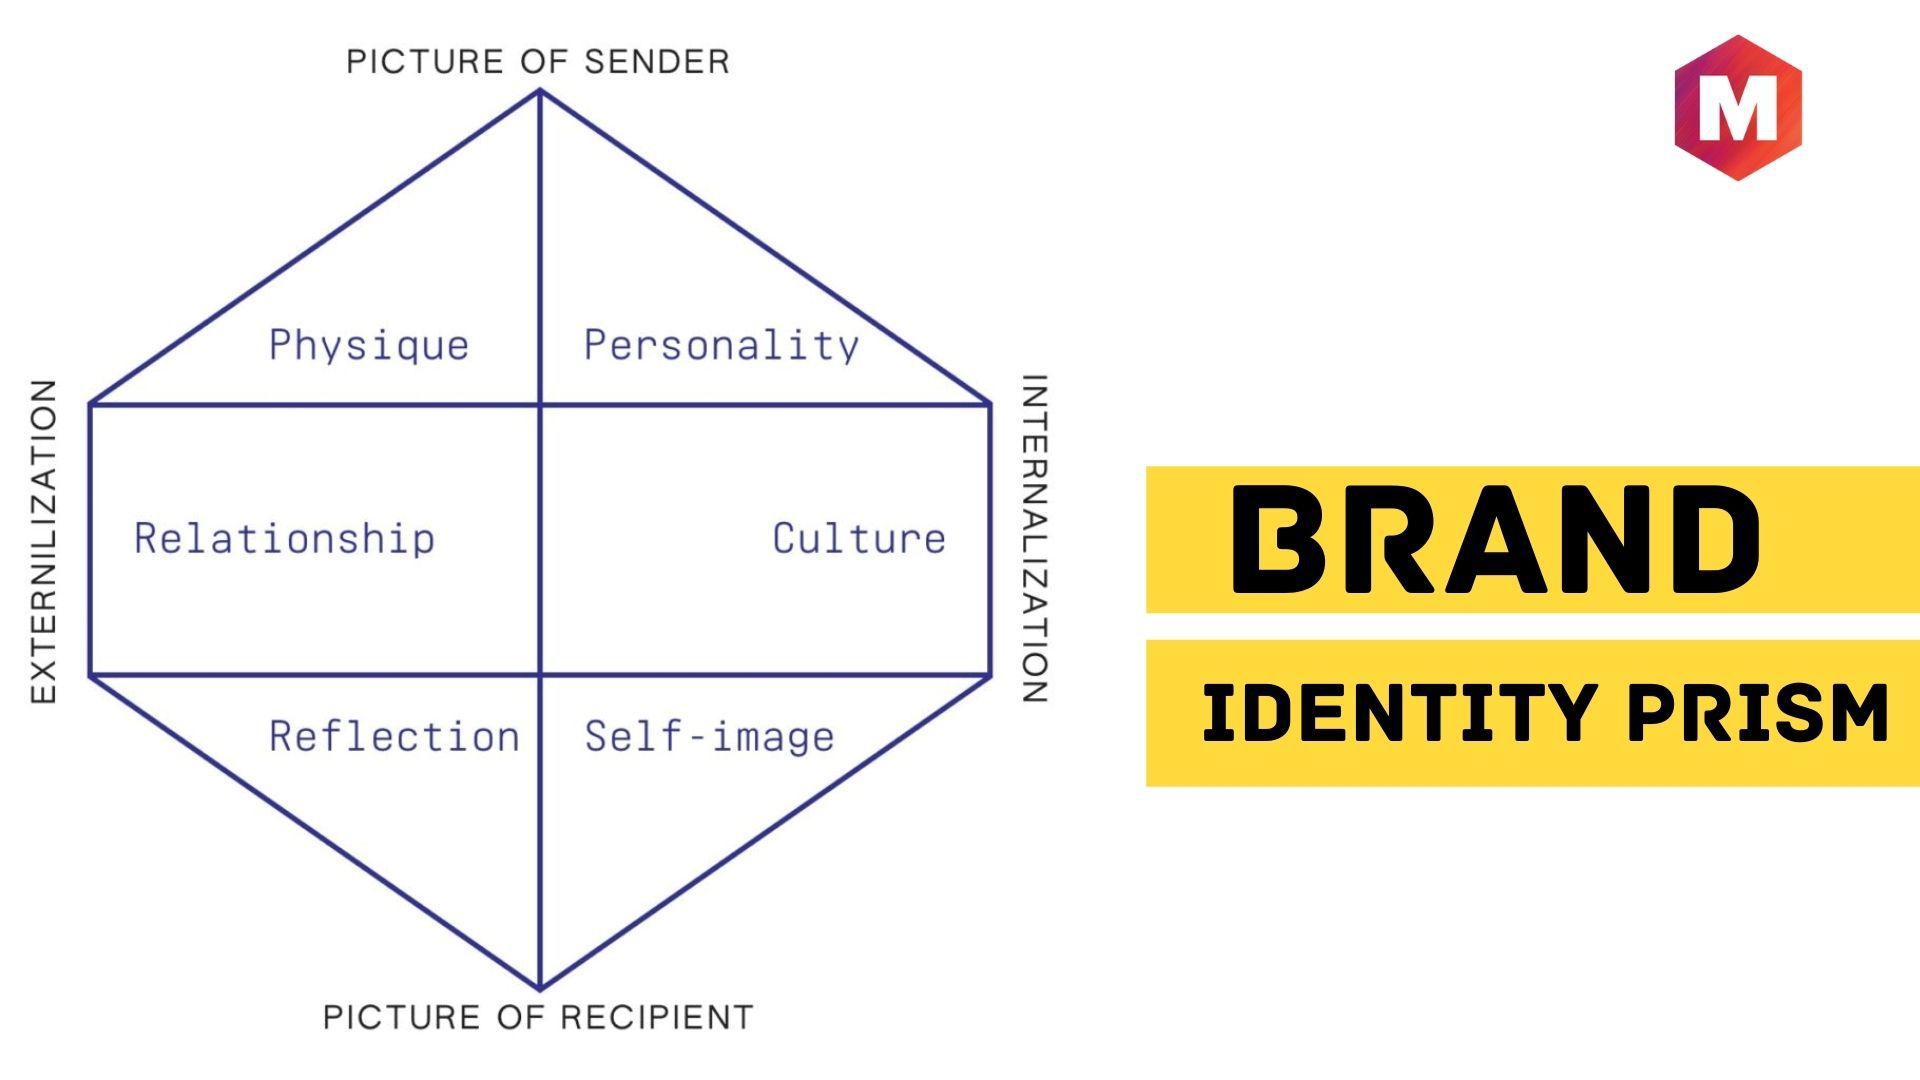 Brand Identity Prism - Definition, Importance and Example of Coca Cola